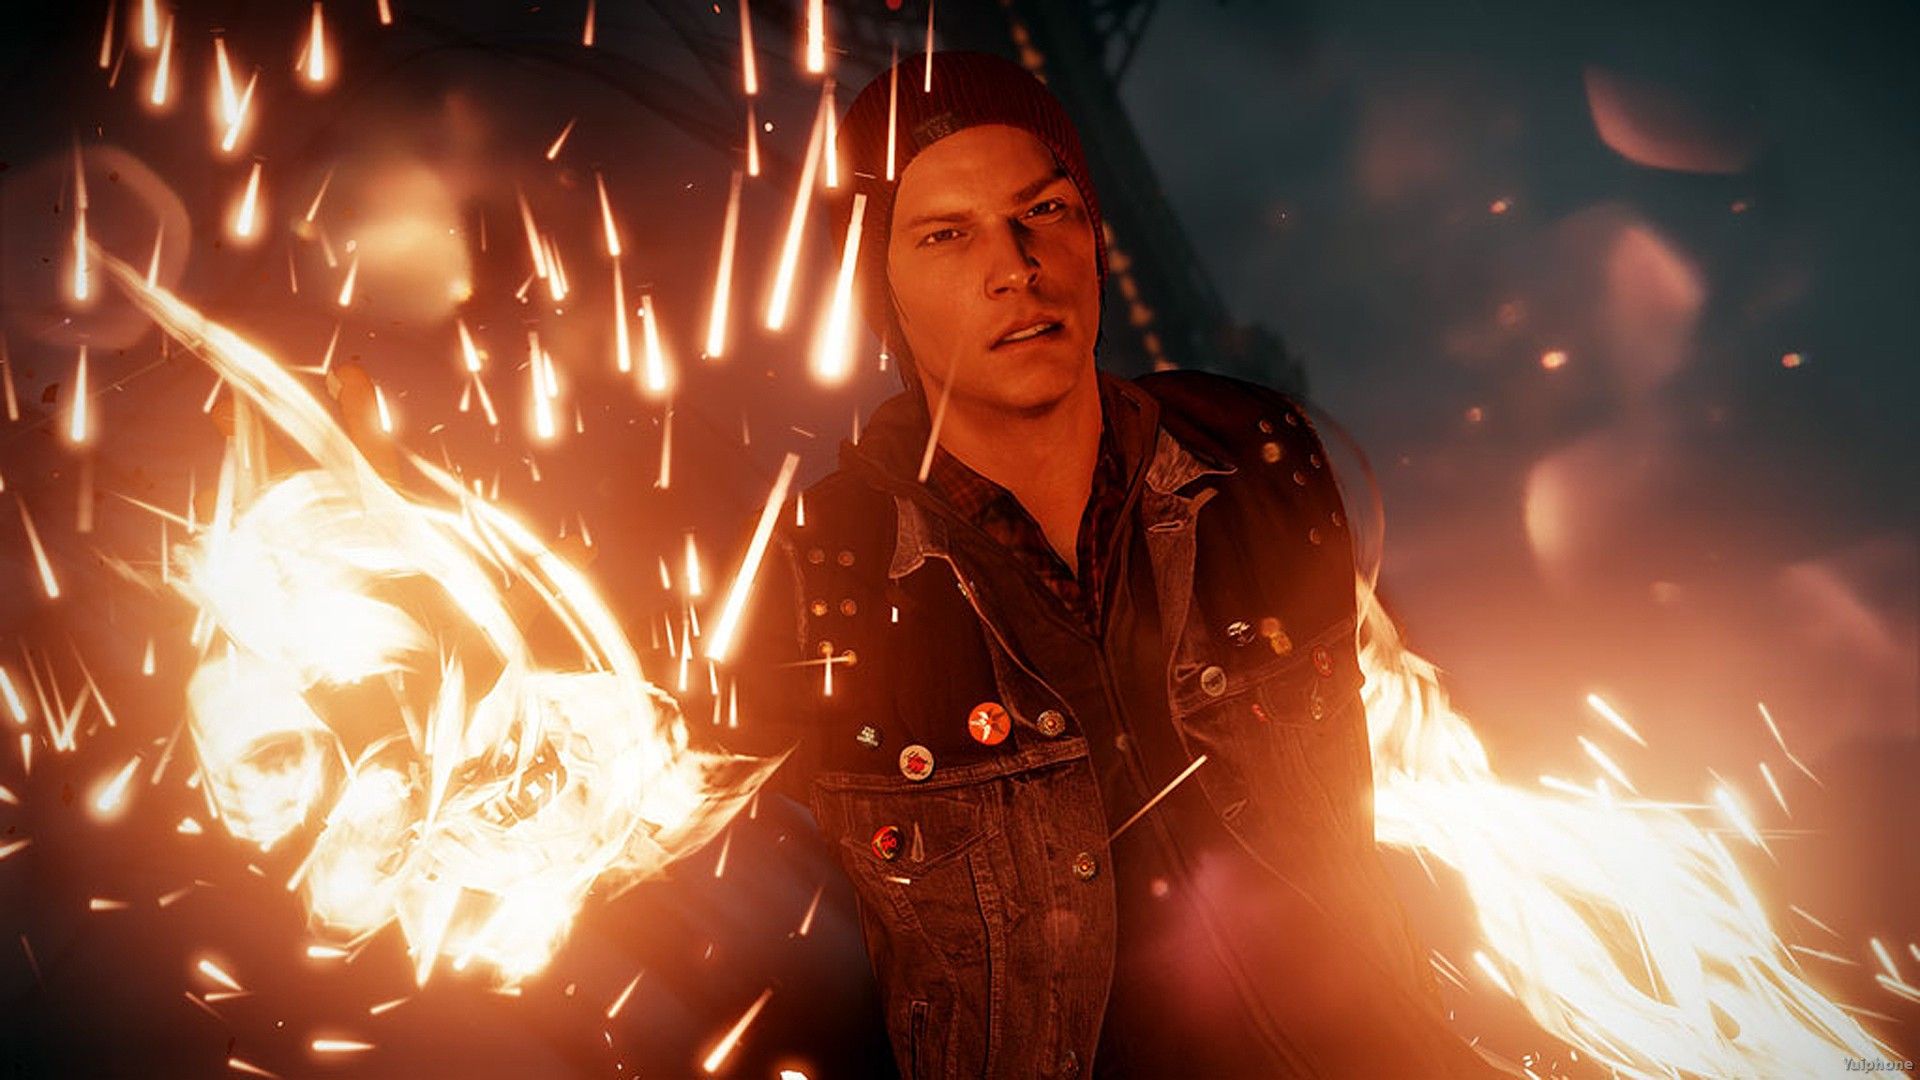 Delsin Rowe Power Wallpaper 1920x1080 Yuiphone. Gaming Access Weekly